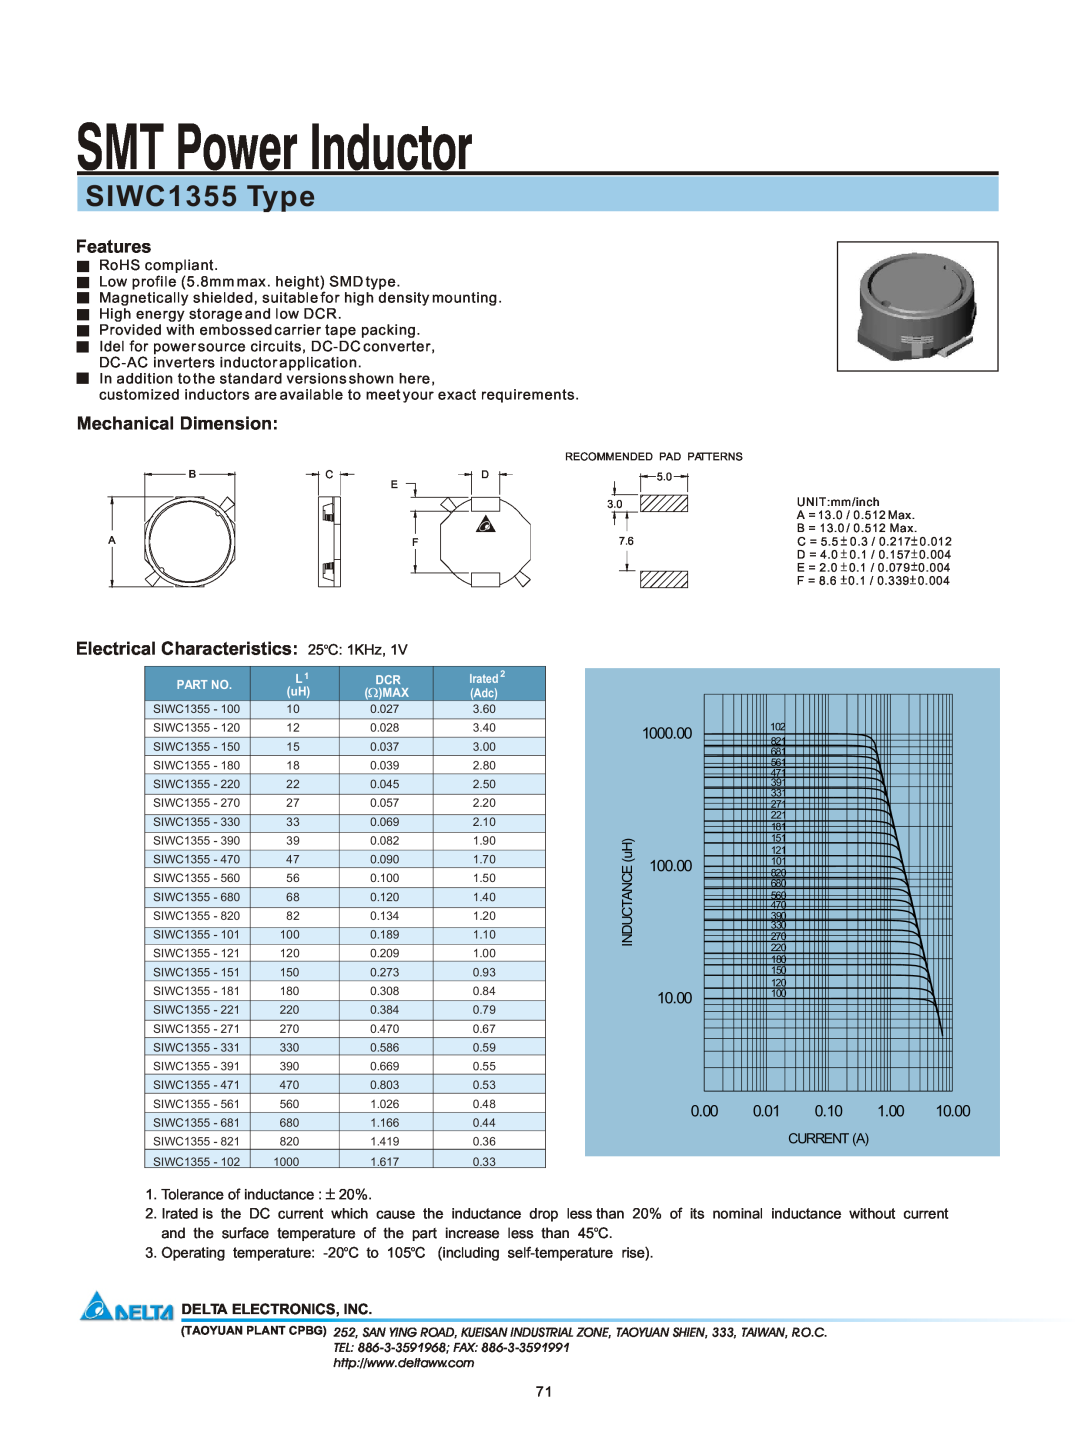 Delta Electronics manual SMT Power Inductor, SIWC1355 Type, Features, Mechanical Dimension, 100.00, 0.00 0.01 0.10 1.00 